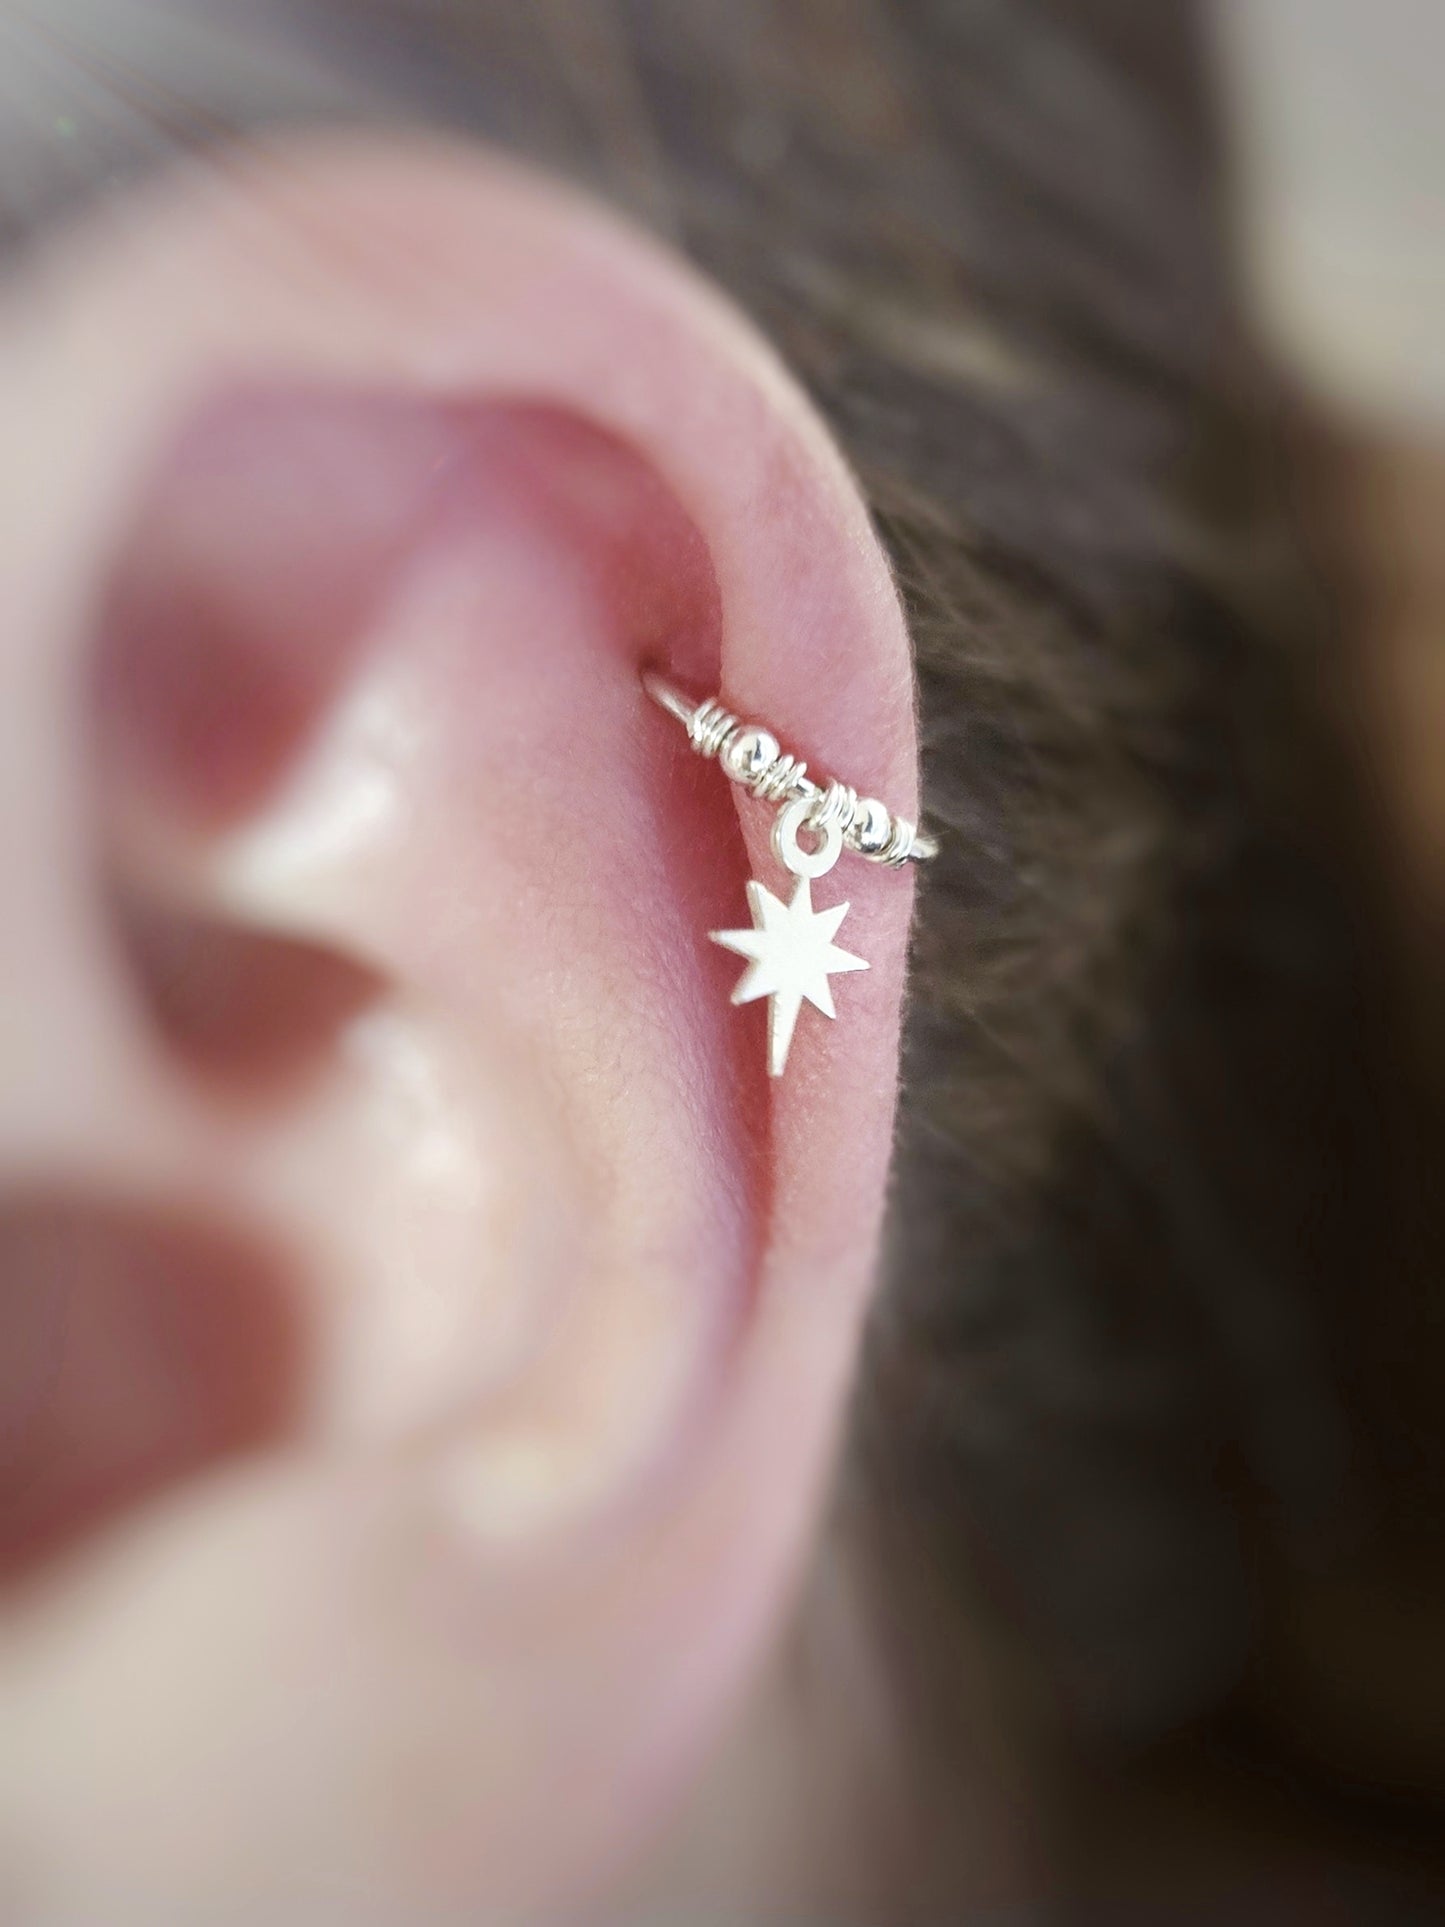 Sterling Silver 20g Star with Beads Helix Cartilage Hoop Earring. 925 Silver Helix Piercing